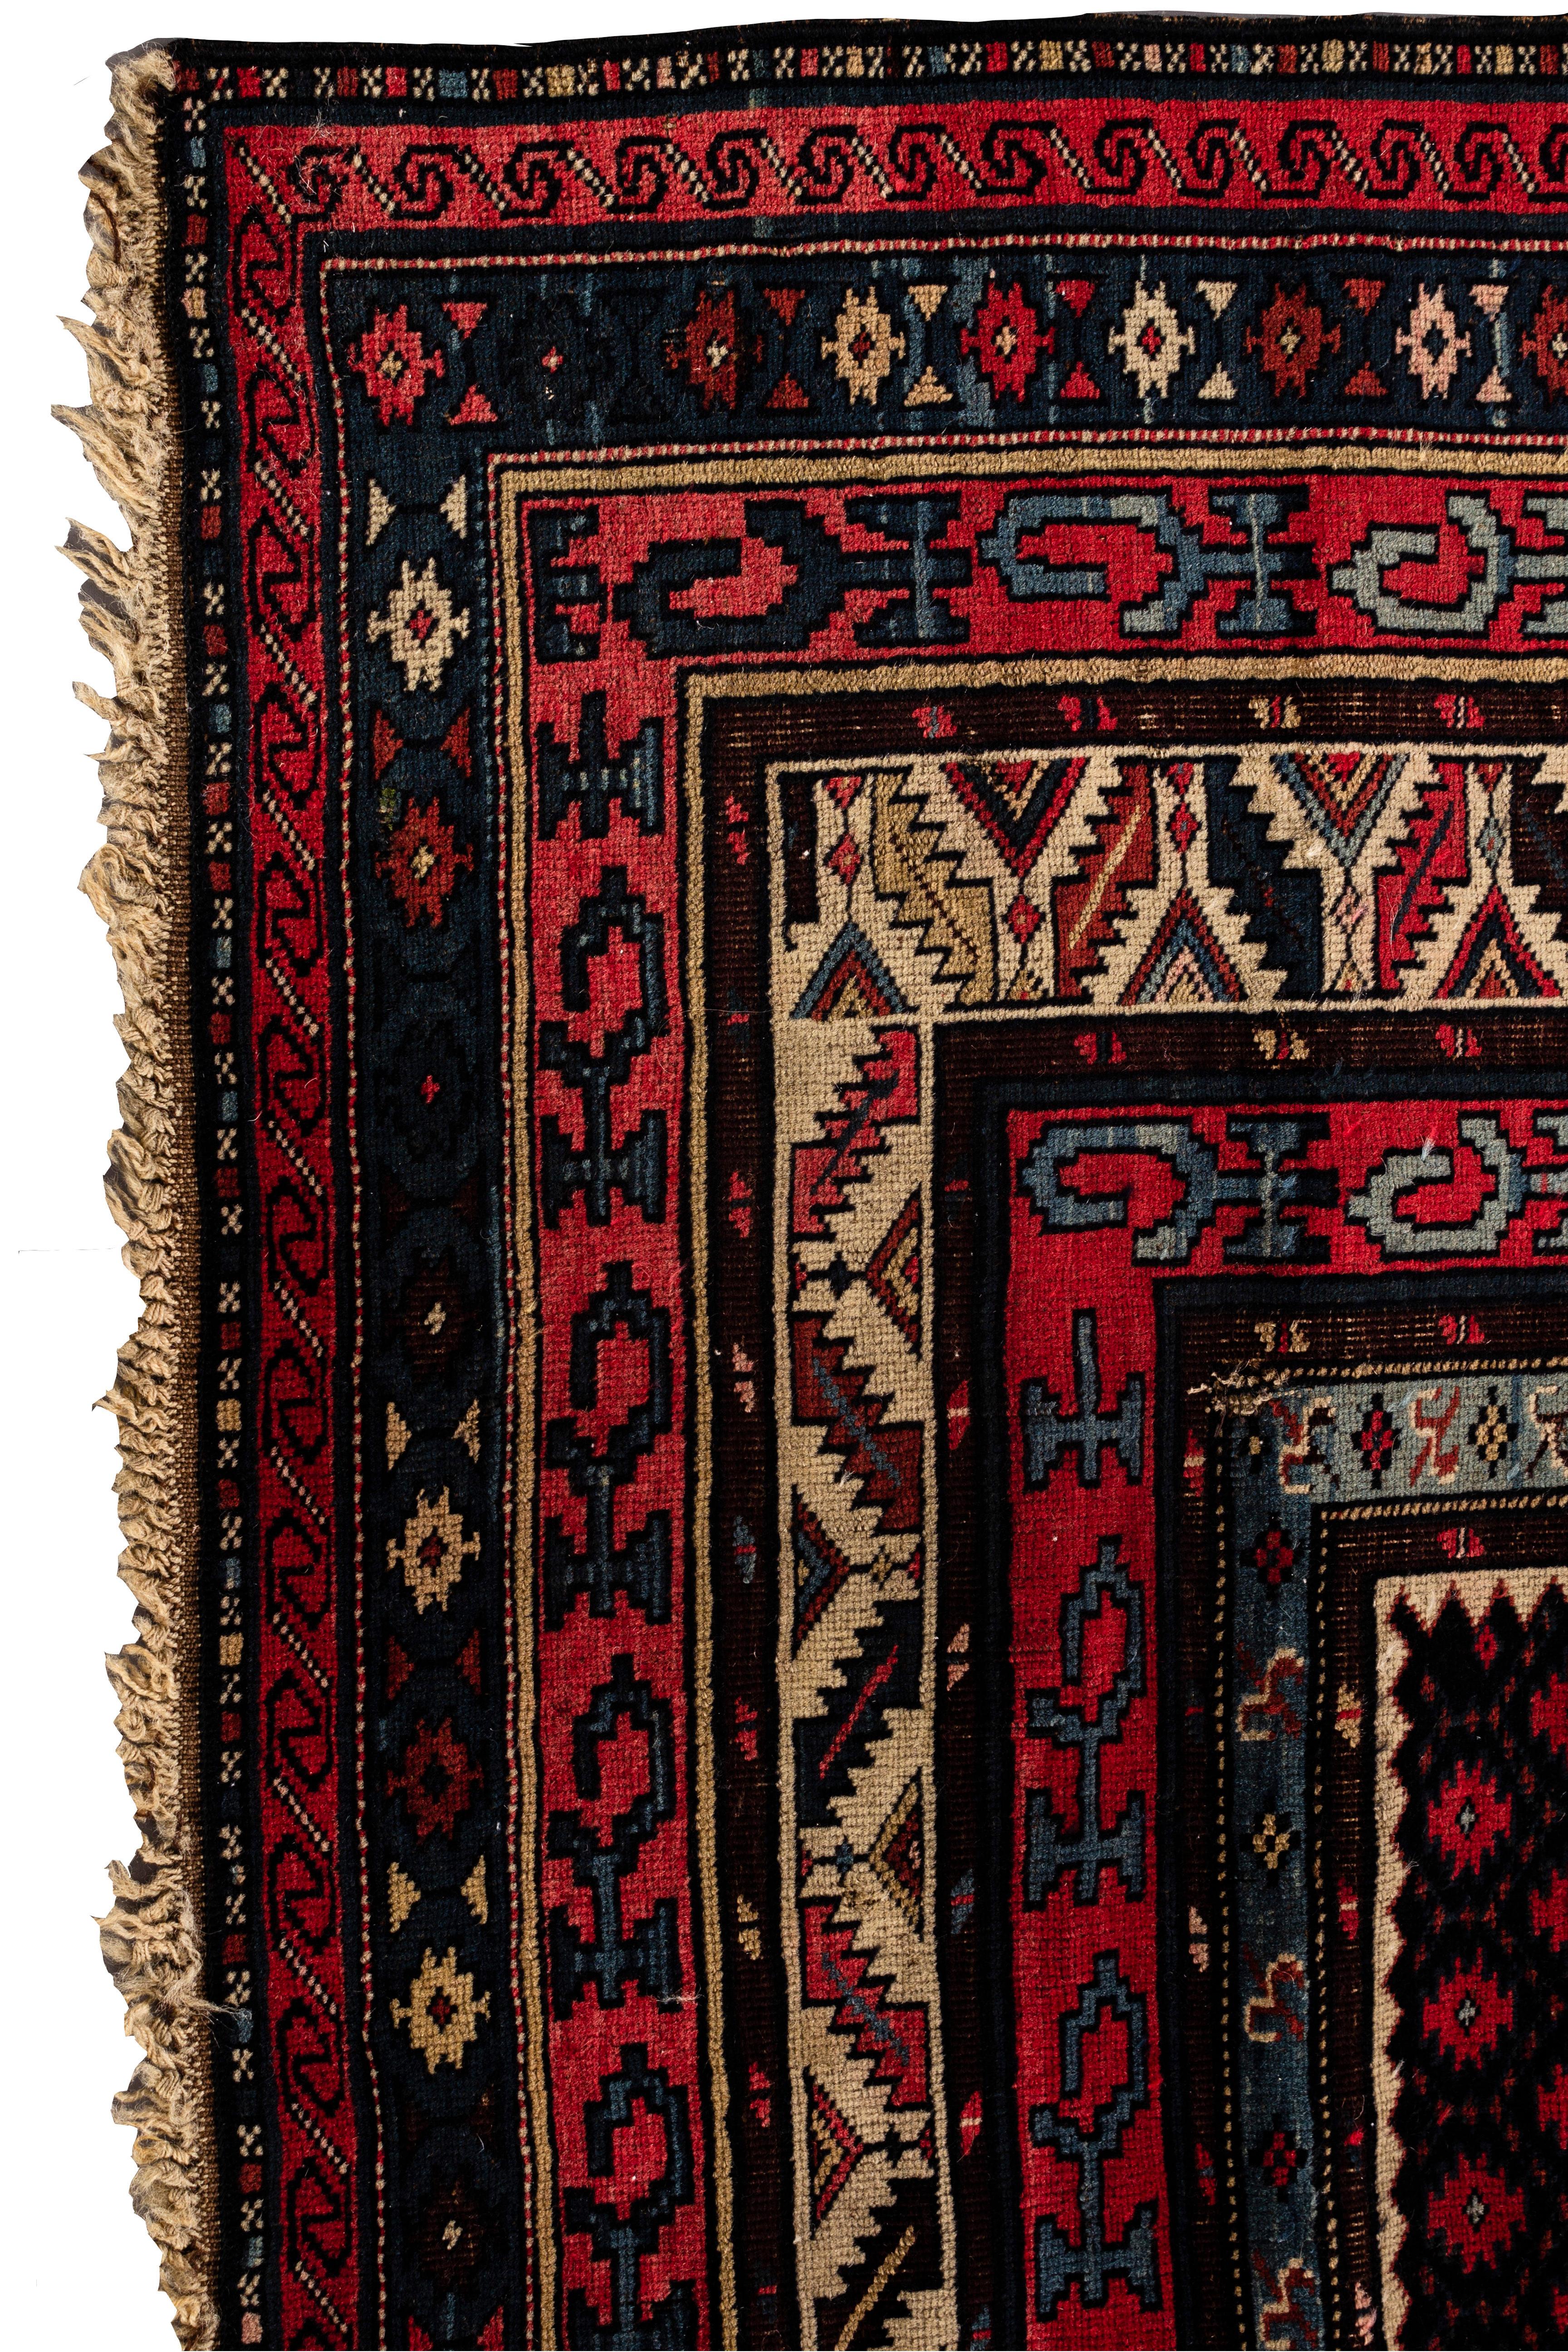 Antique Caucasian Shirvan rug, circa 1890. A Shirvan handwoven Caucasian rug, circa 1890. These types of antique Caucasian rugs were woven in the eastern part of the region, mostly along the west coast of the Caspian Sea and show in the design, the